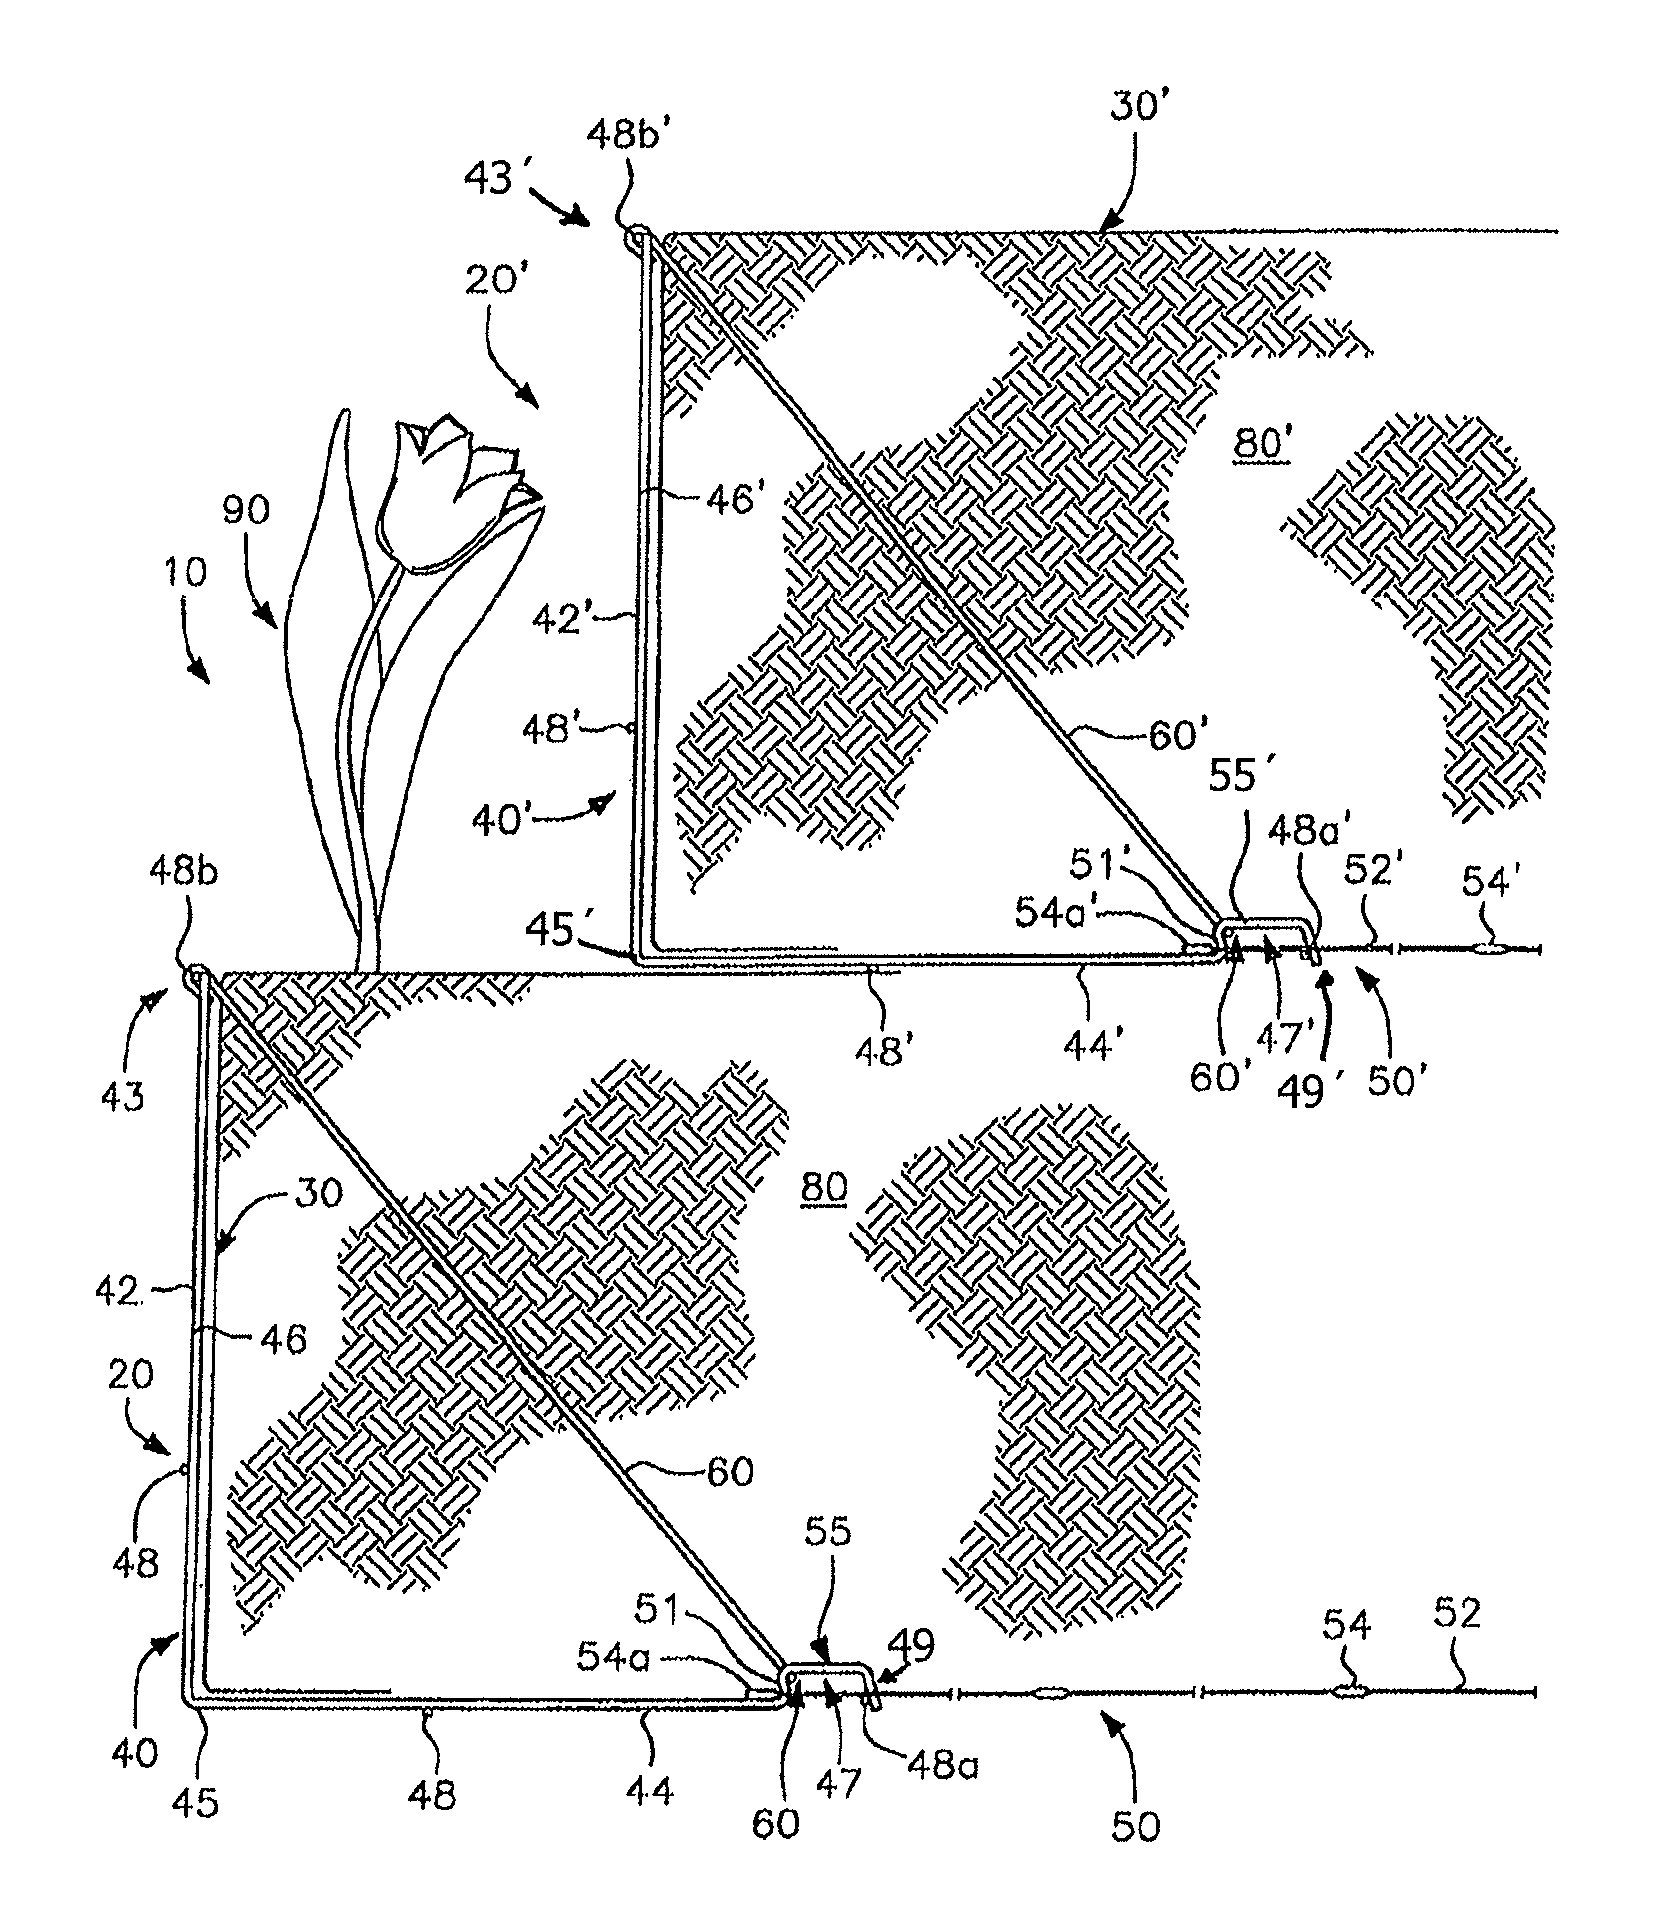 Combined strut and connector retaining wall system and method therefor